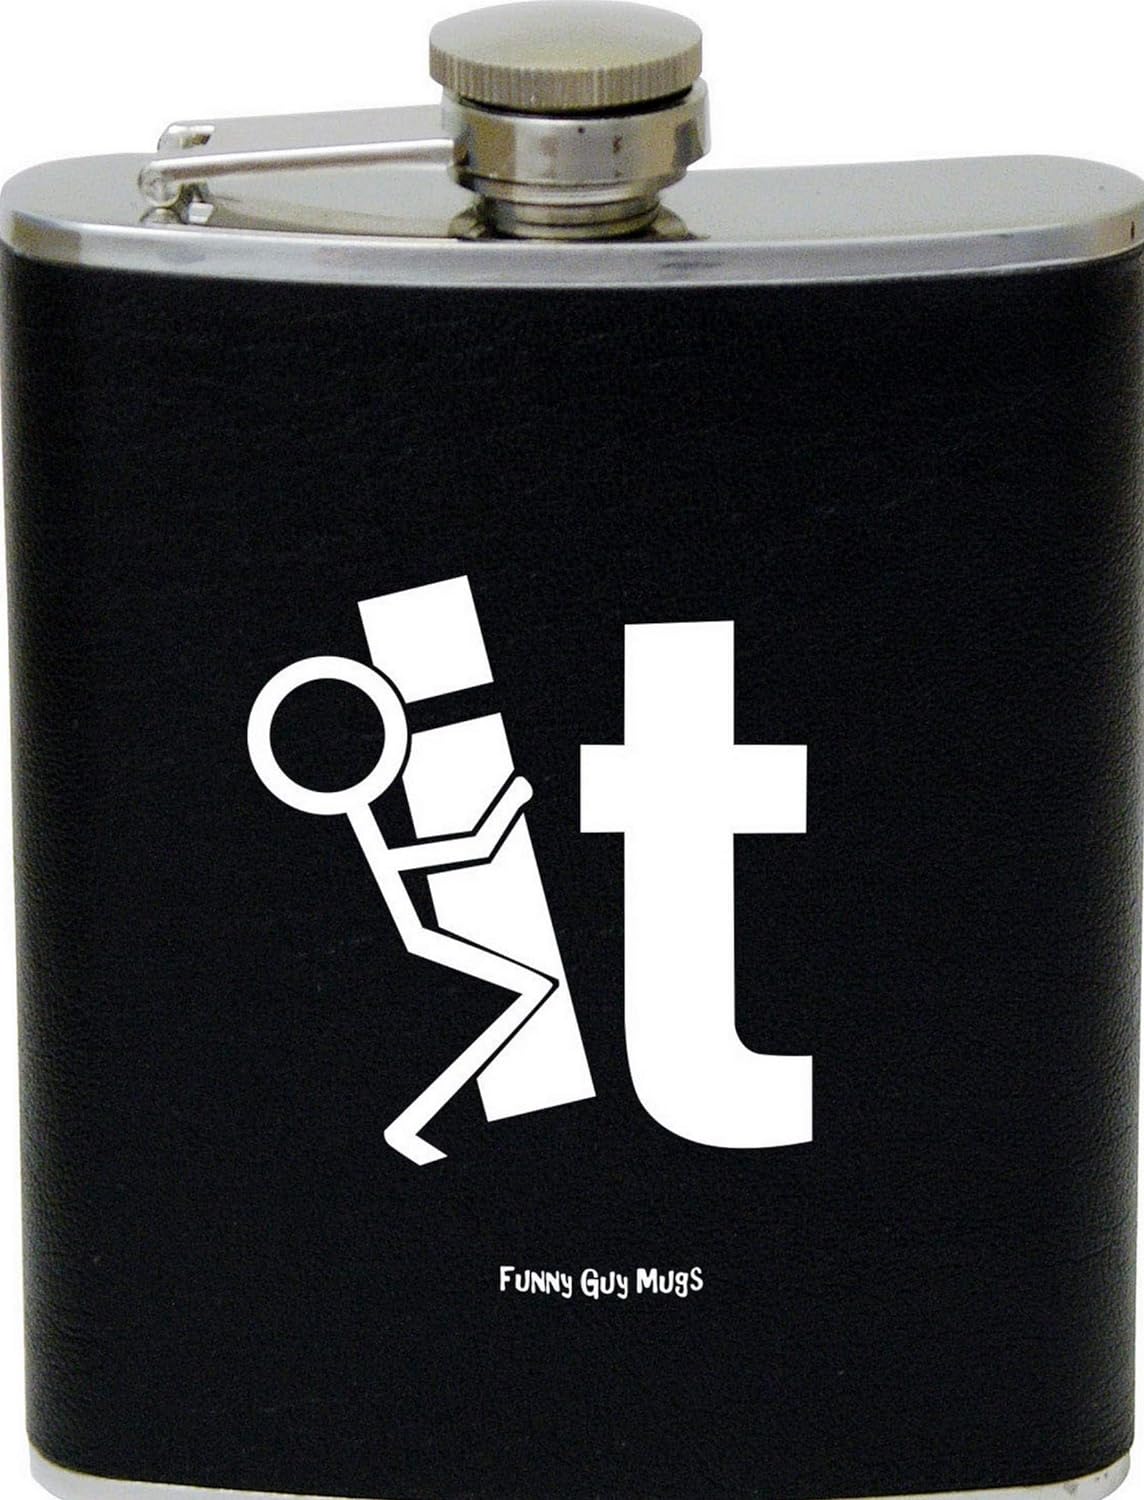 Funny Guy Mugs Stainless Steel 7oz Hip Flask…